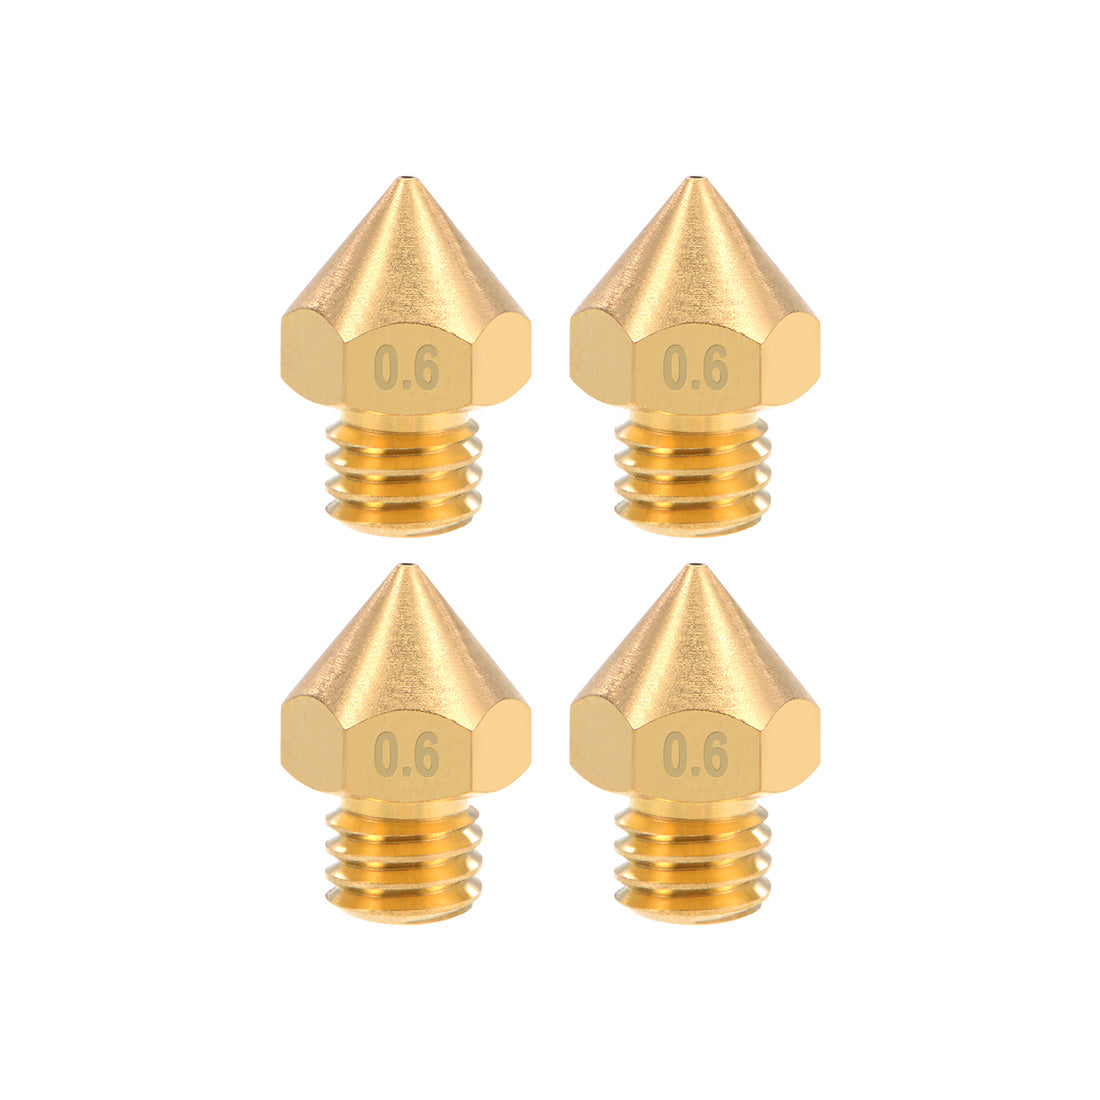 uxcell Uxcell 0.6mm 3D Printer Nozzles Head M6 for MK8 1.75mm Extruder Print, Brass 4pcs